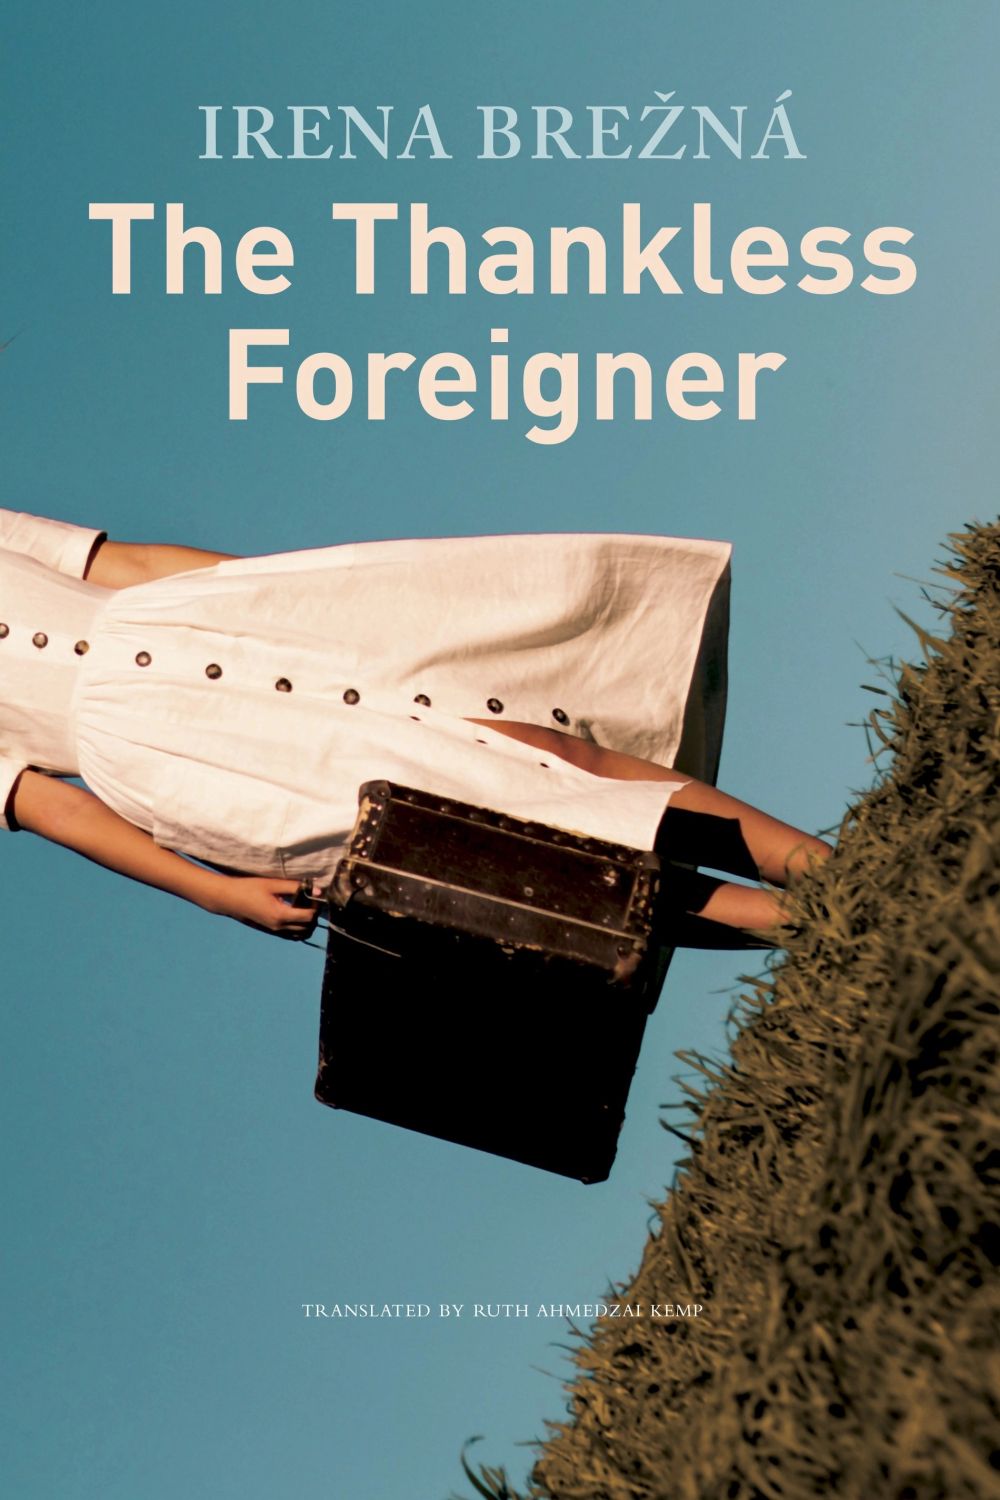 front cover of Irena Brezna – The Thankless Foreigner